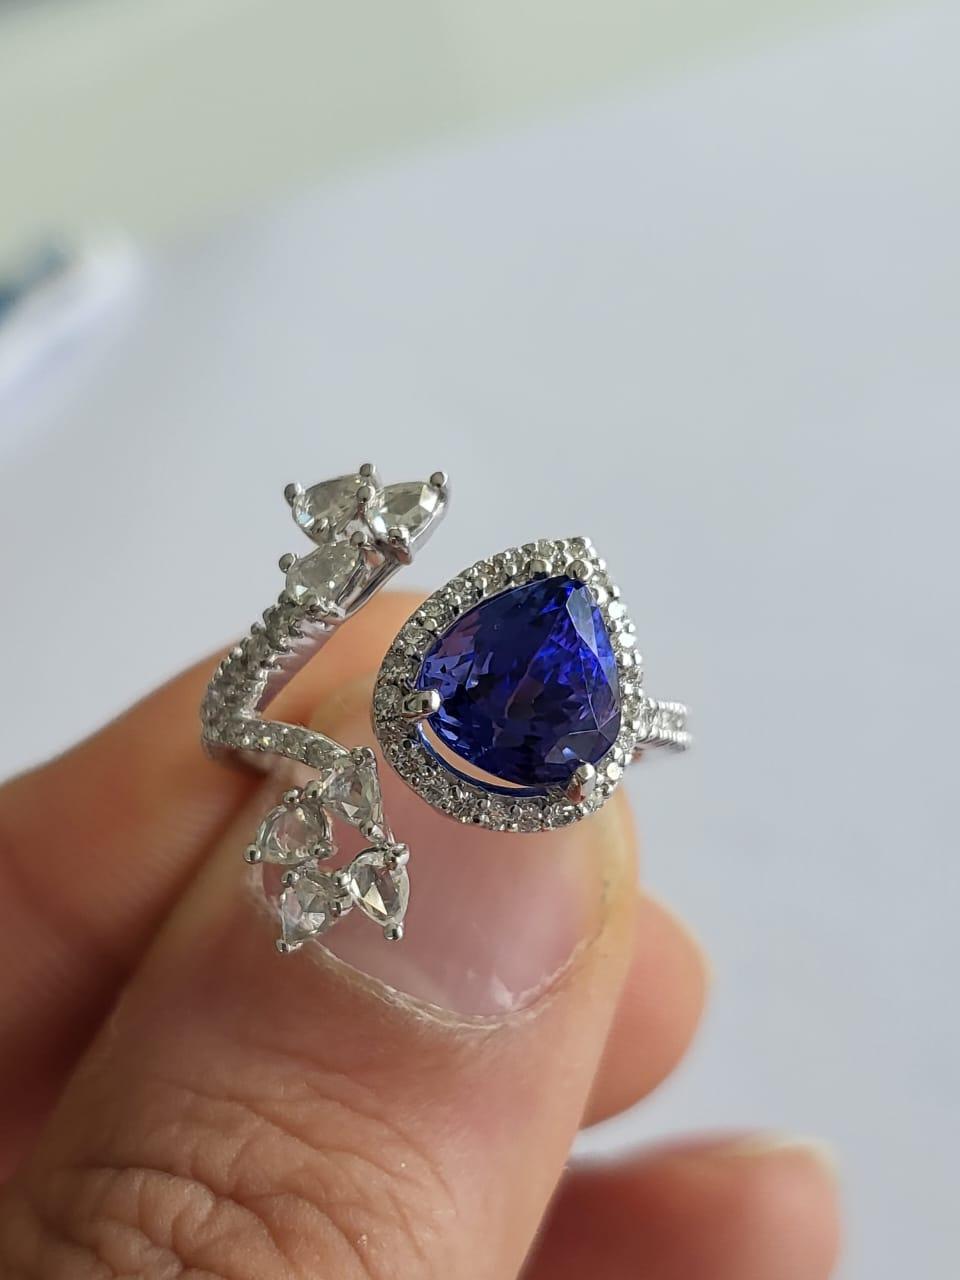 A very gorgeous and beautiful, Tanzanite Cocktail / Engagement Ring set in 18K White Gold & Diamonds. The weight of the pear shaped Tanzanite is 2.68 carats. The Tanzanite is completely natural and responsibly sourced from Tanzania. The weight of